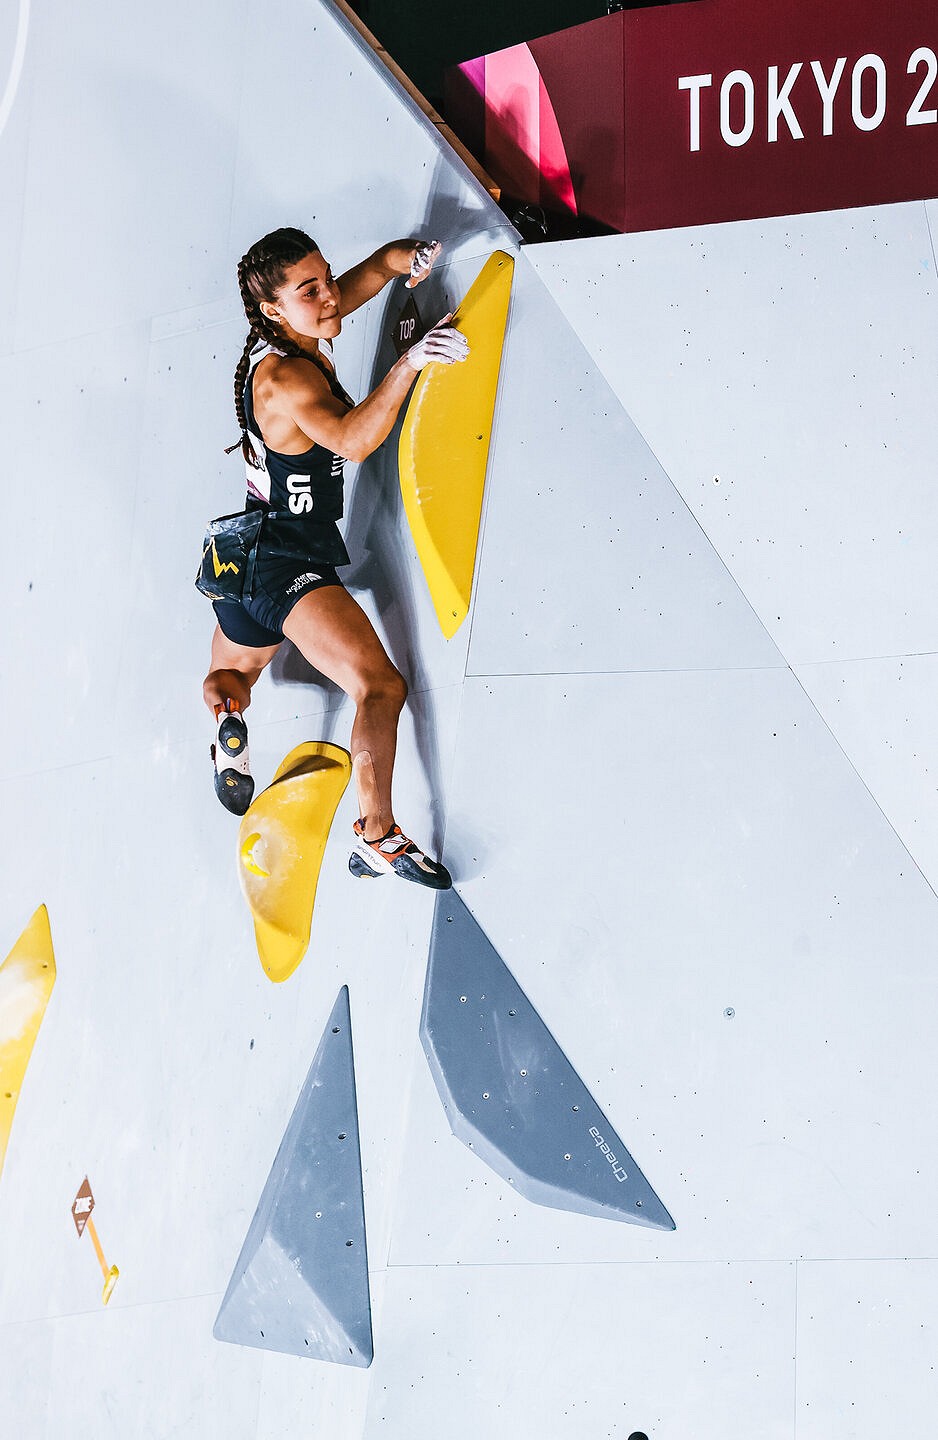 Brooke Raboutou came second in the bouldering. She didn't quite make this one though with a last second foot slip!  © Jon Glassberg / Louder Than 11